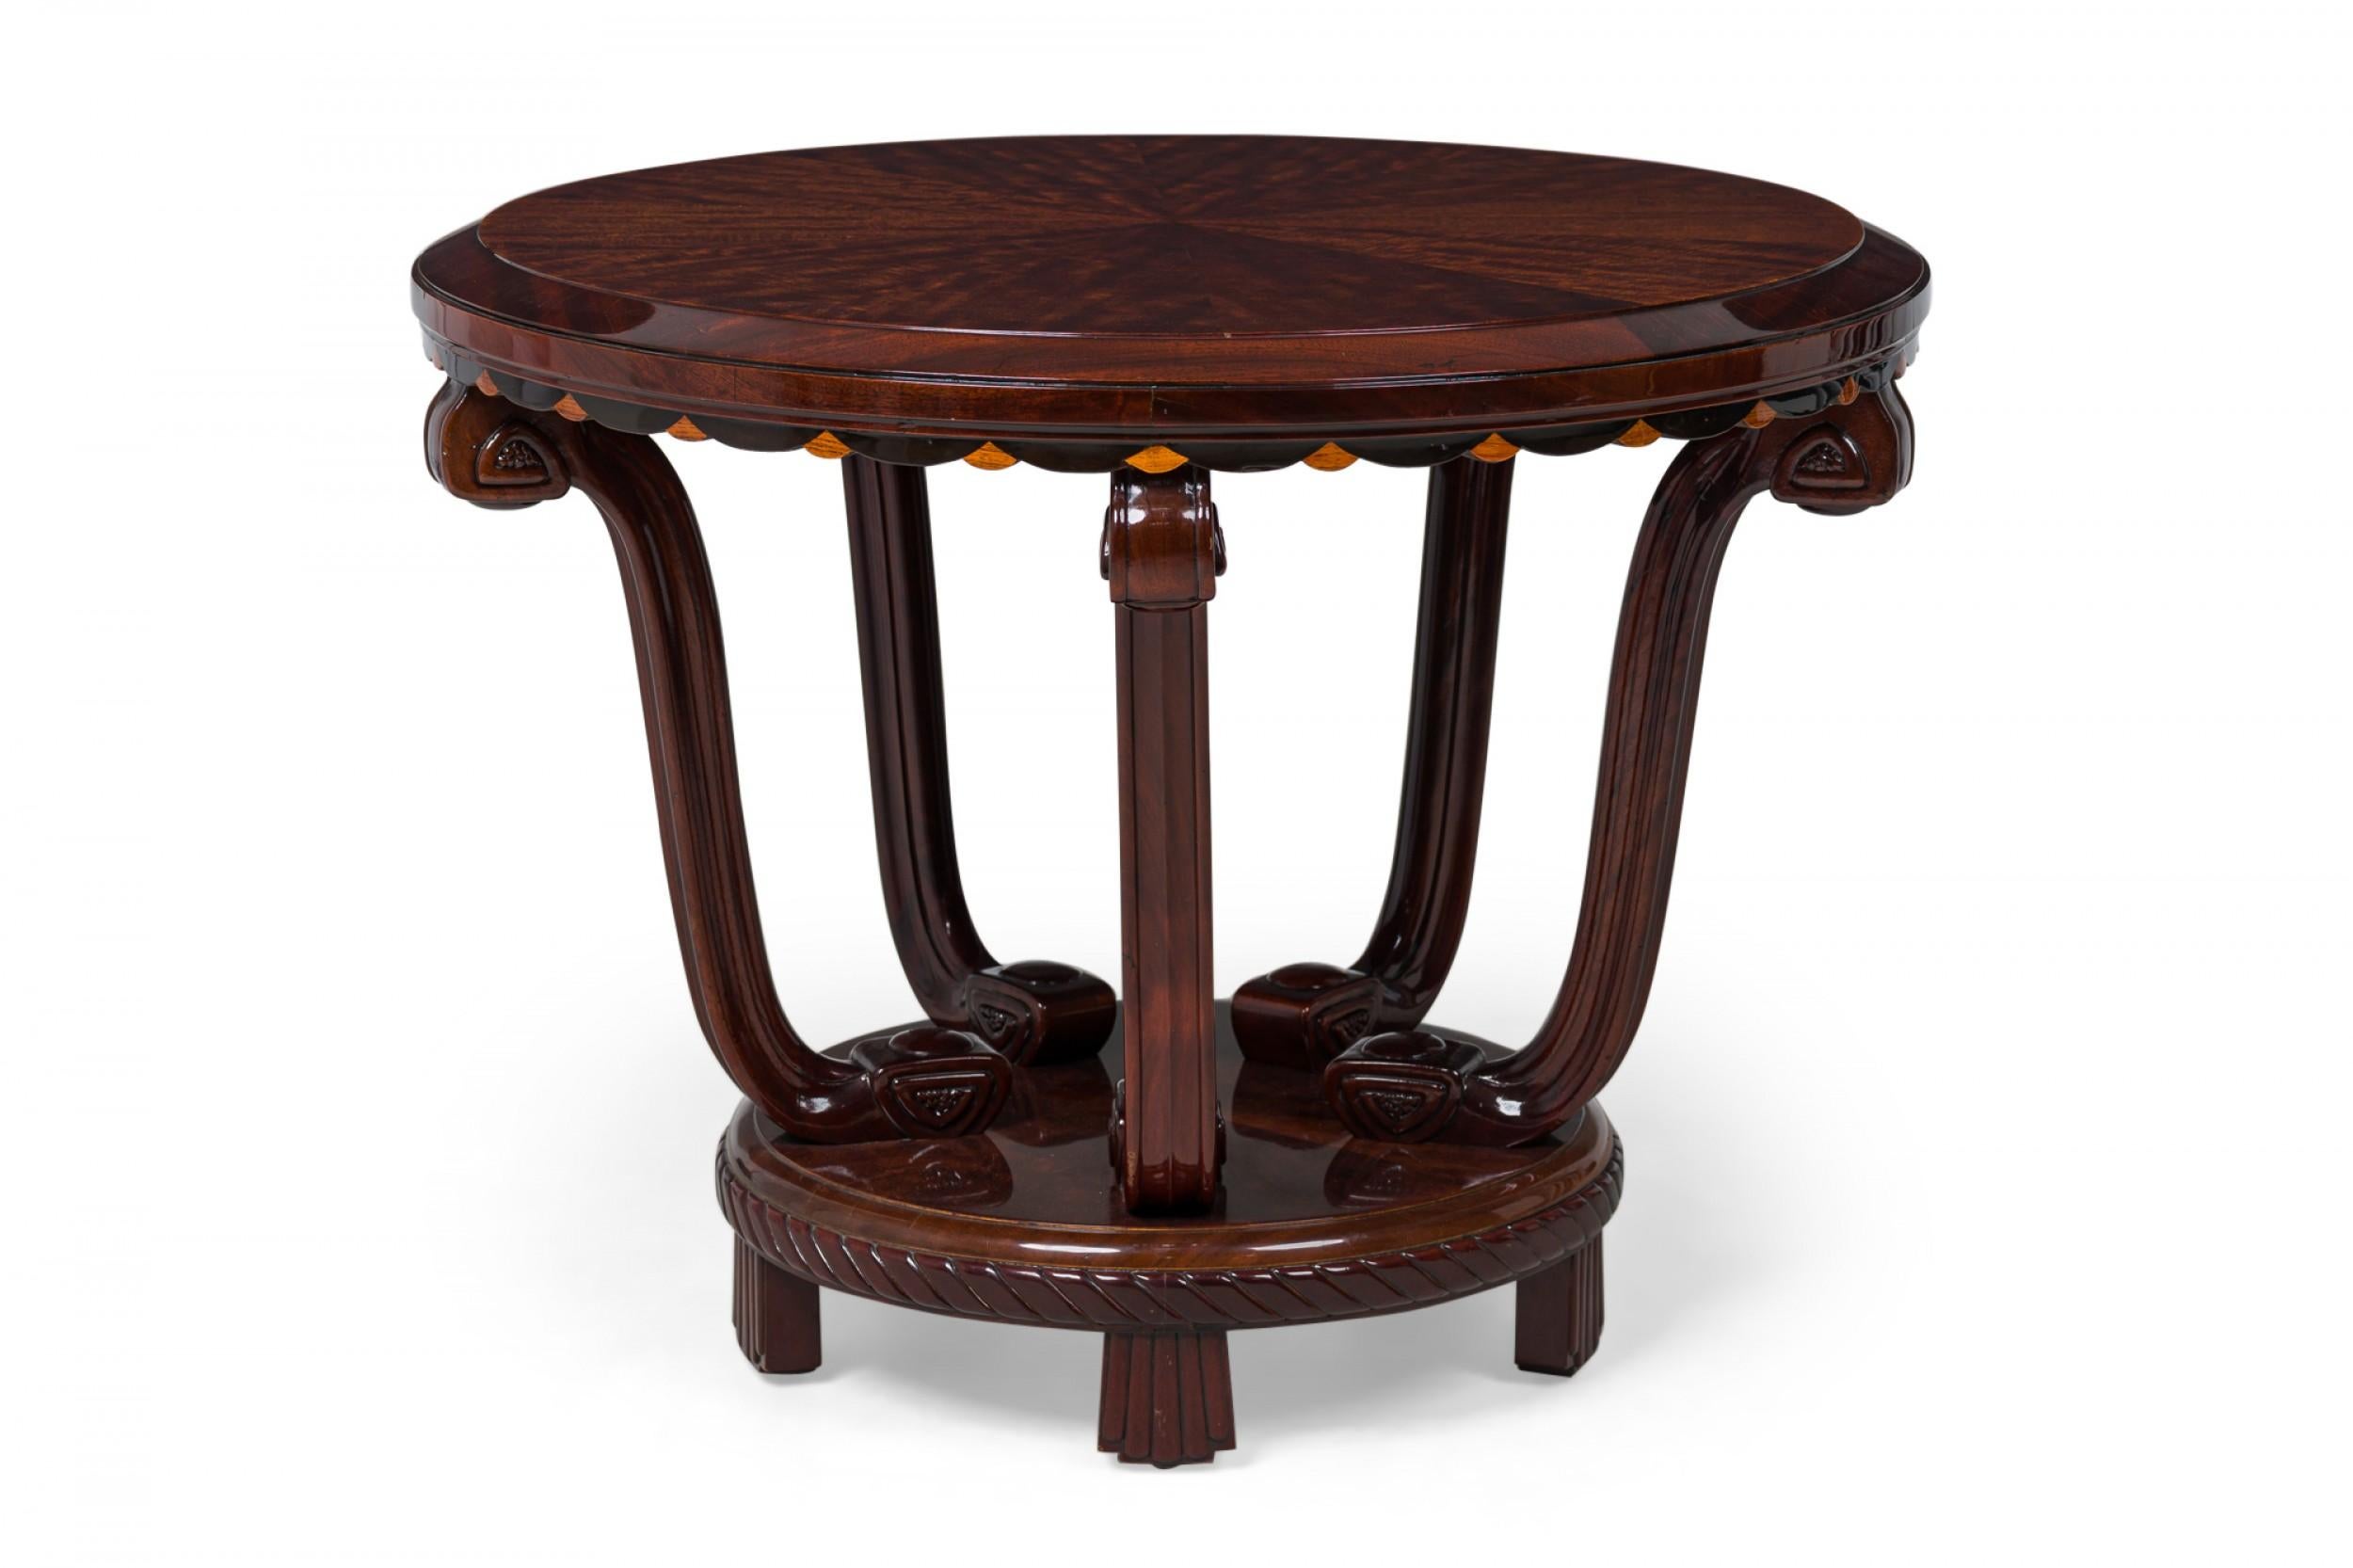 French Late Art Deco palisander circular center / side table with a veneered top and base in radial formation, scalloped apron with inlaid wedges, 5 carved legs mounted to the base which features a central inlaid circle and molded rope frieze,